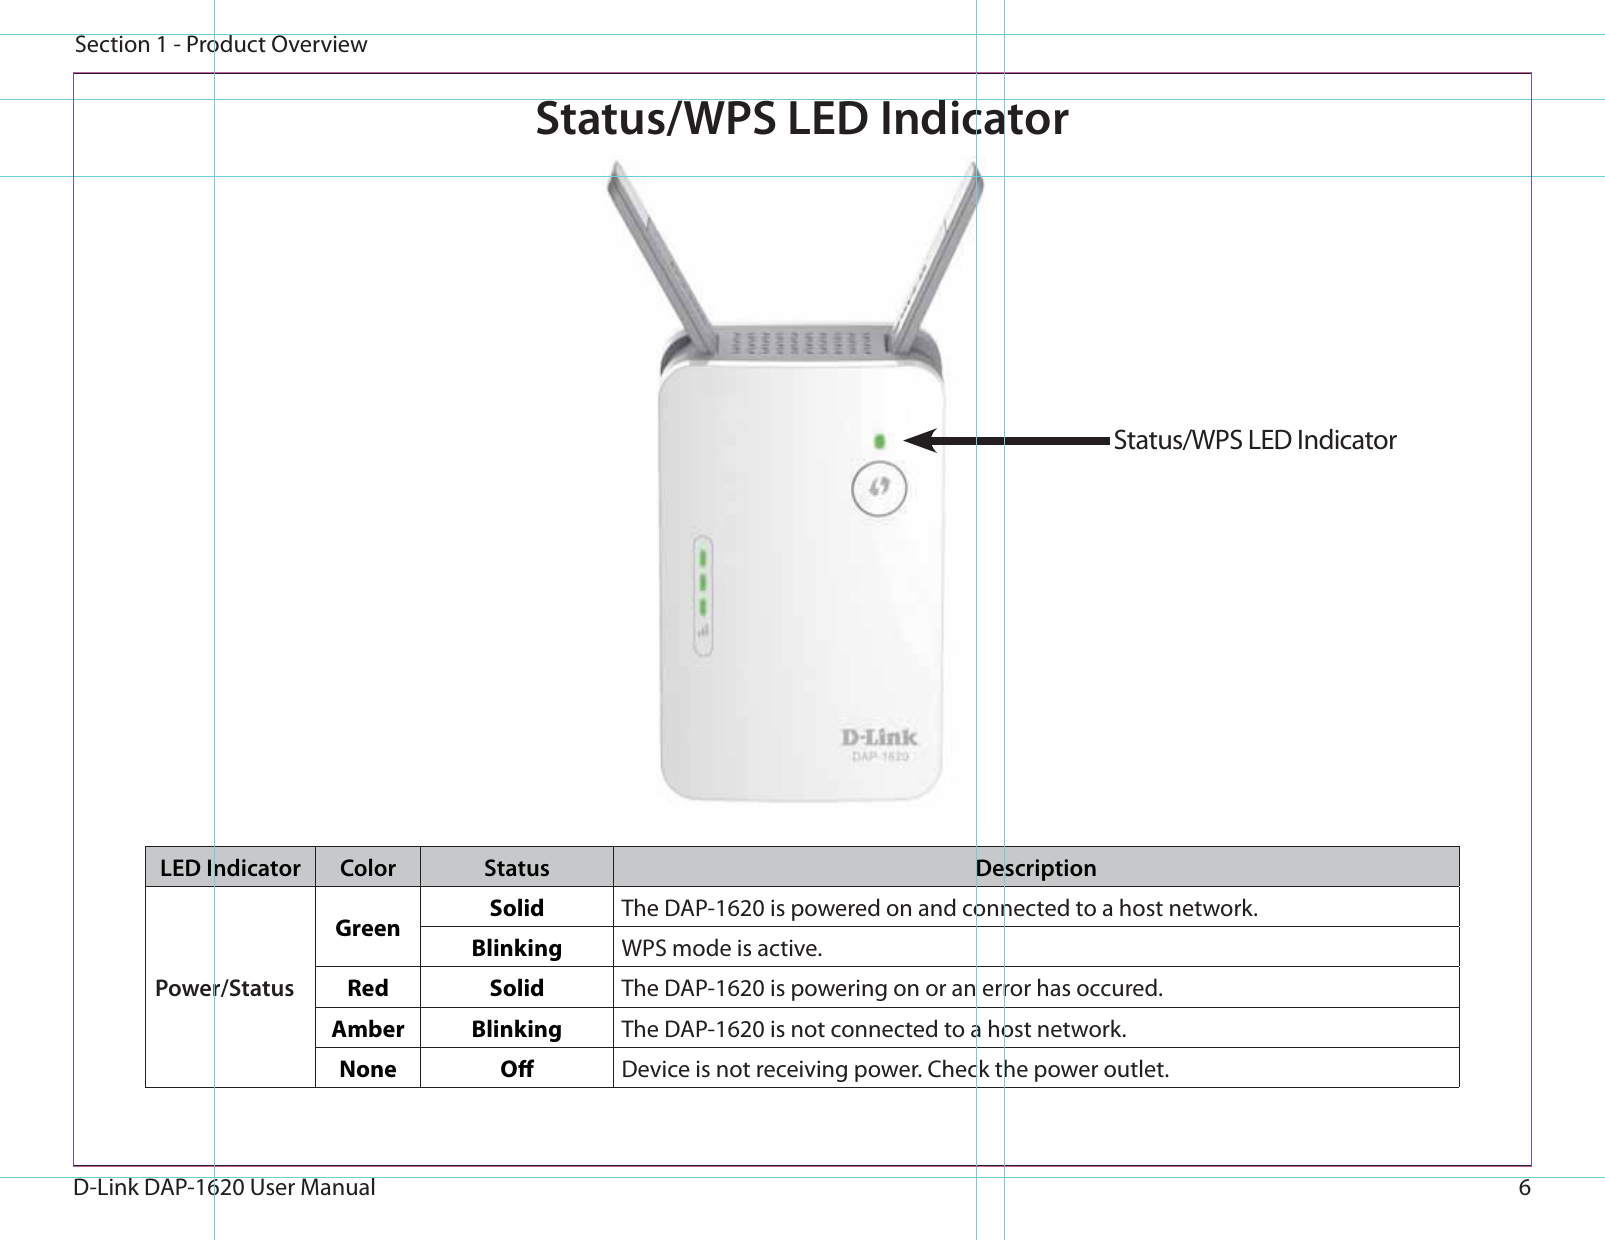 6D-Link DAP-1620 User ManualSection 1 - Product OverviewLED Indicator Color Status DescriptionPower/StatusGreen  Solid The DAP-1620 is powered on and connected to a host network.Blinking WPS mode is active.Red Solid The DAP-1620 is powering on or an error has occured.Amber Blinking The DAP-1620 is not connected to a host network.None O Device is not receiving power. Check the power outlet. Status/WPS LED IndicatorStatus/WPS LED Indicator